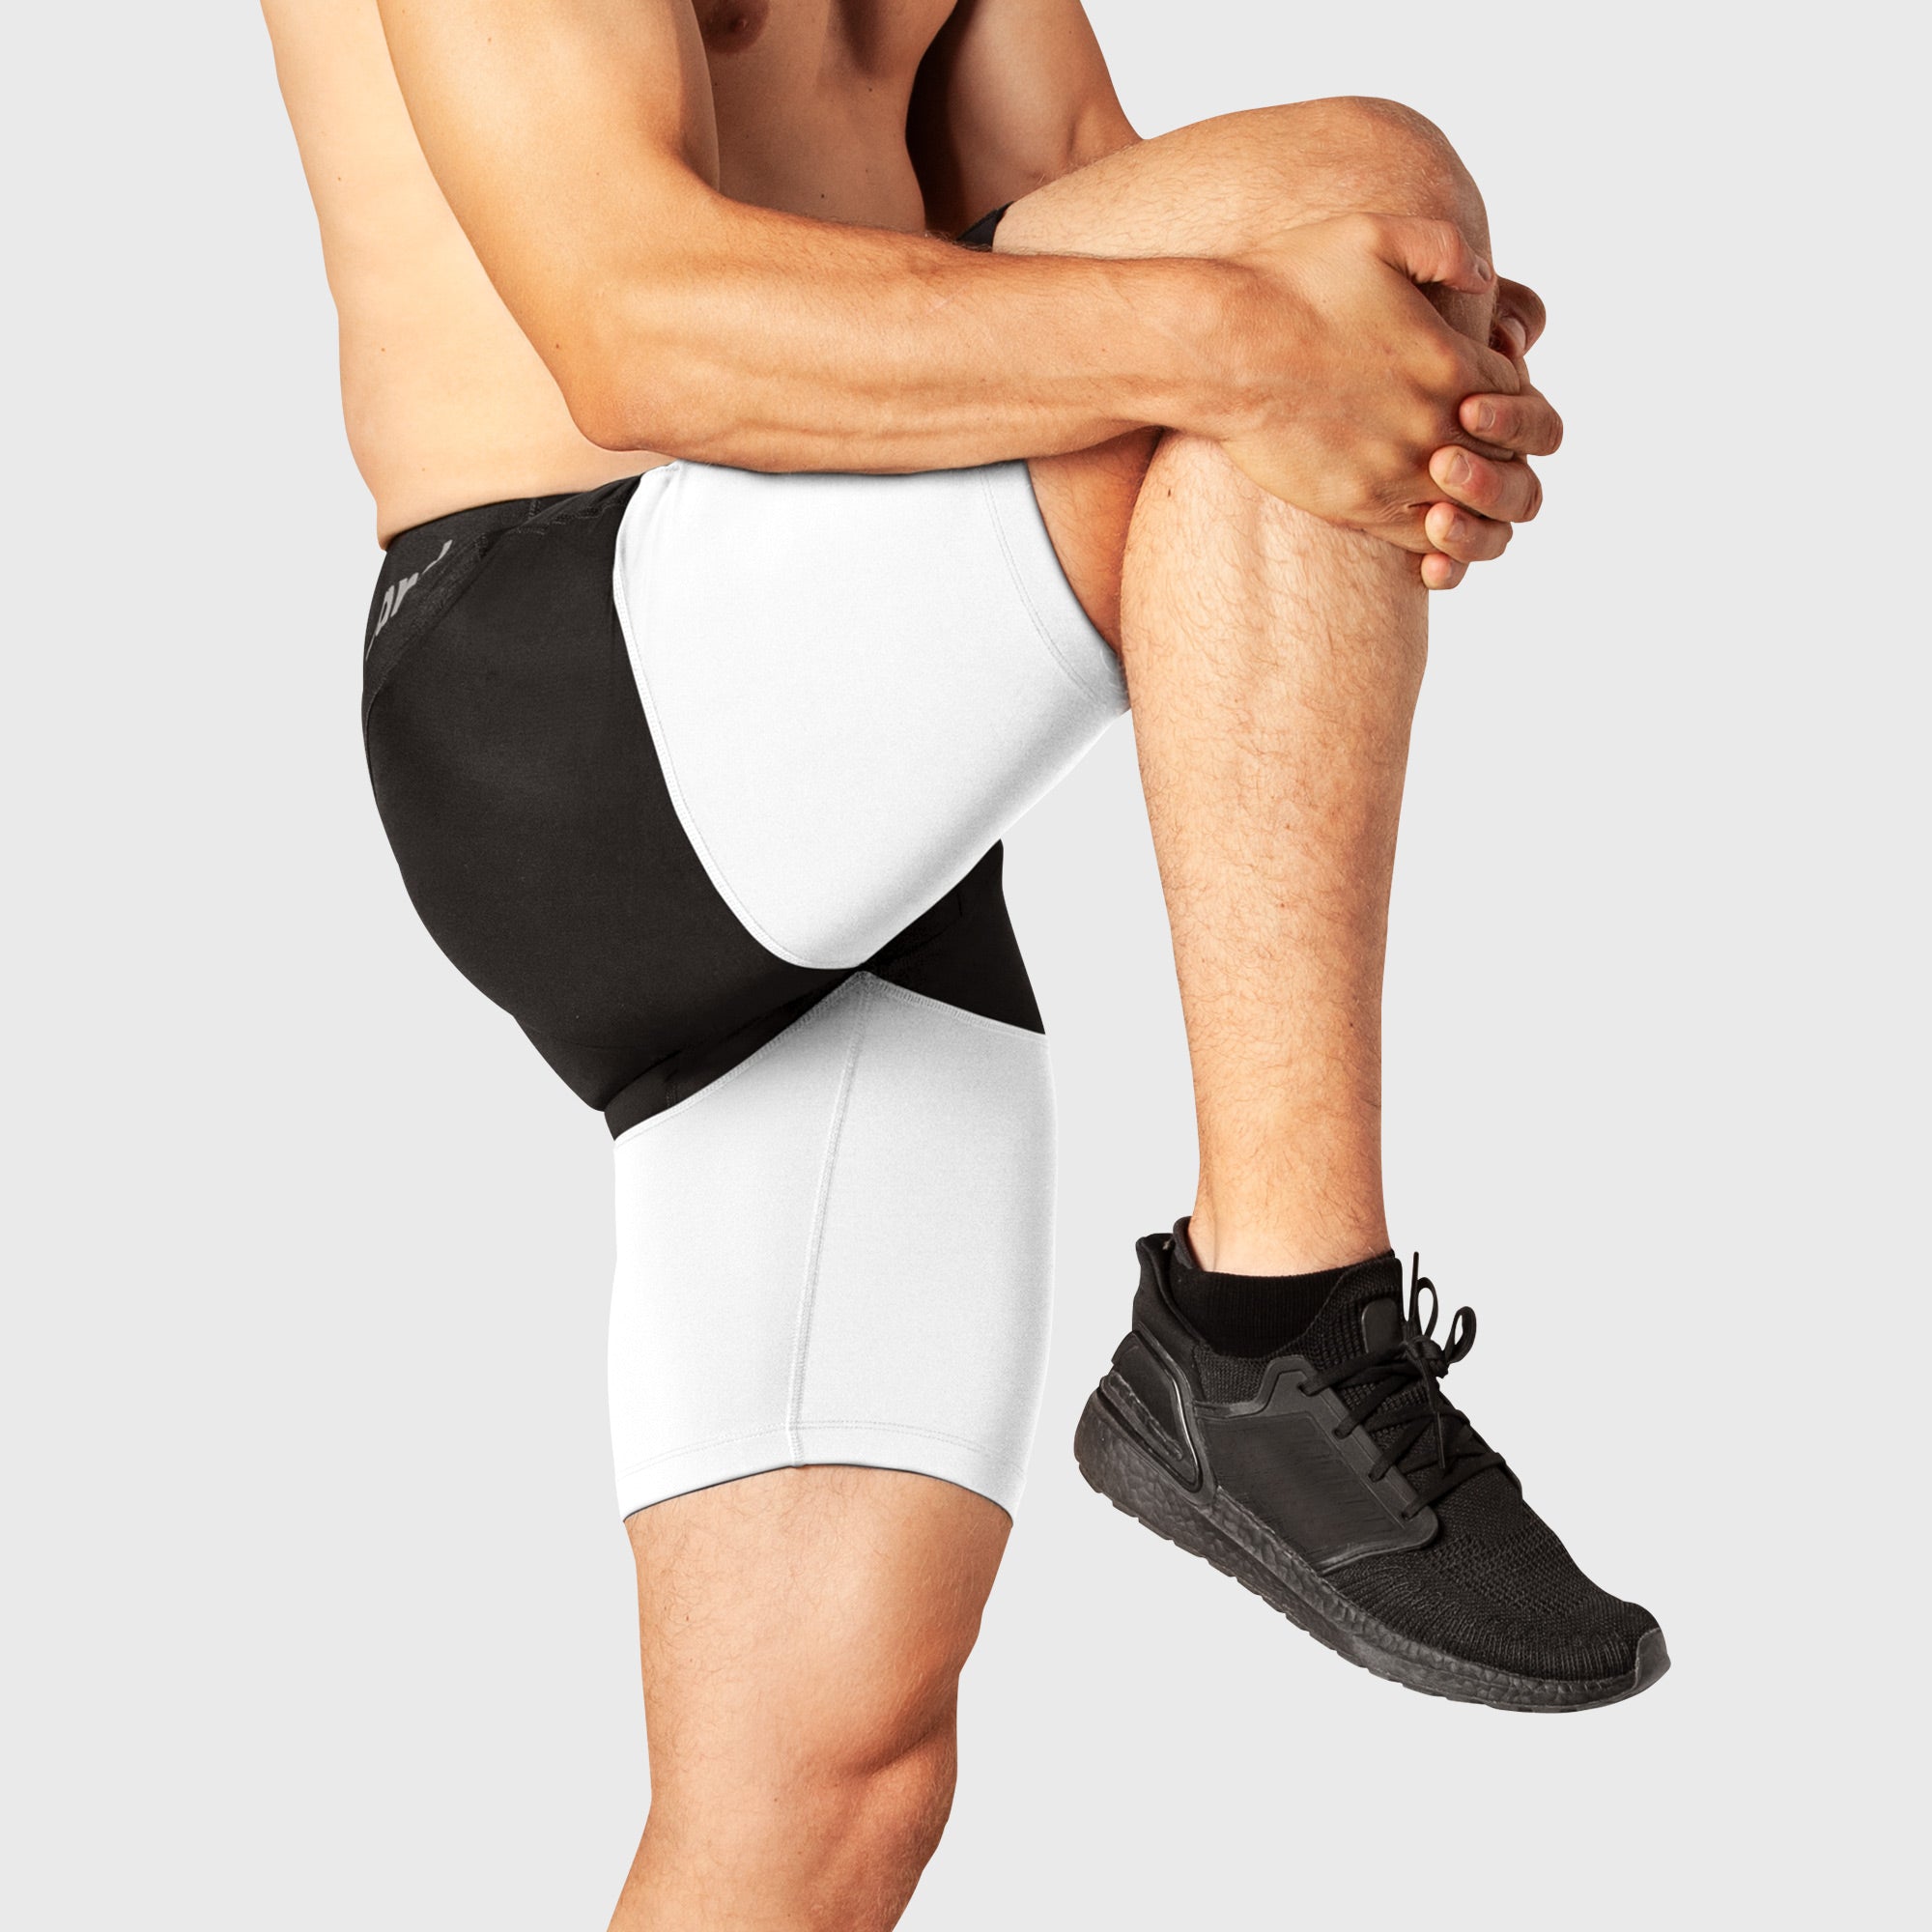 Buy Men's Workout Shorts with Inner Tights